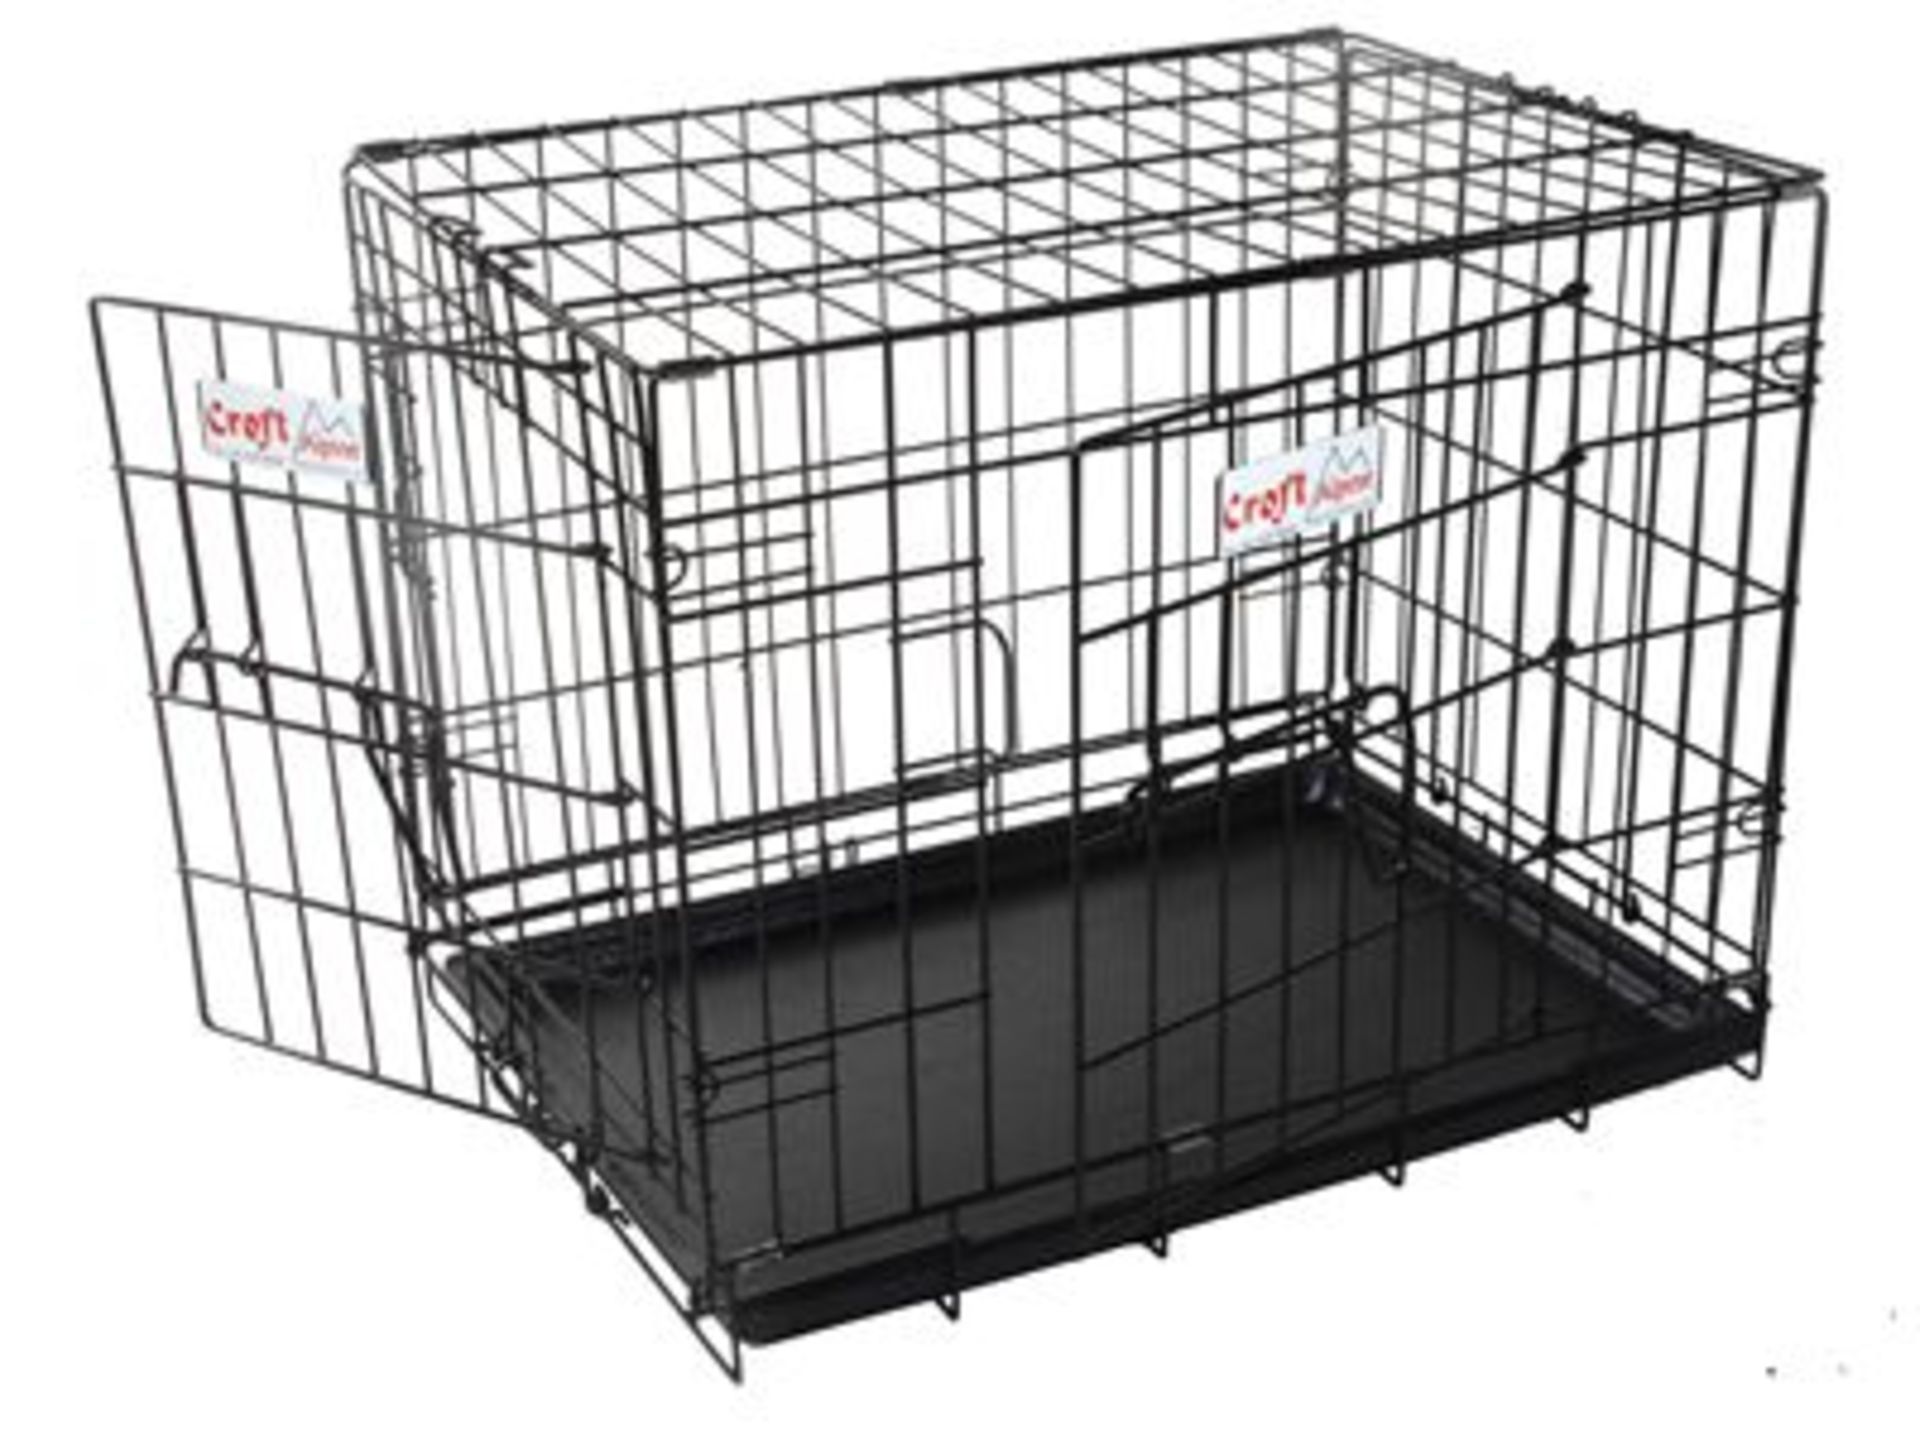 19 x Alpine Wire Dog Crate 24". Total RRP £703